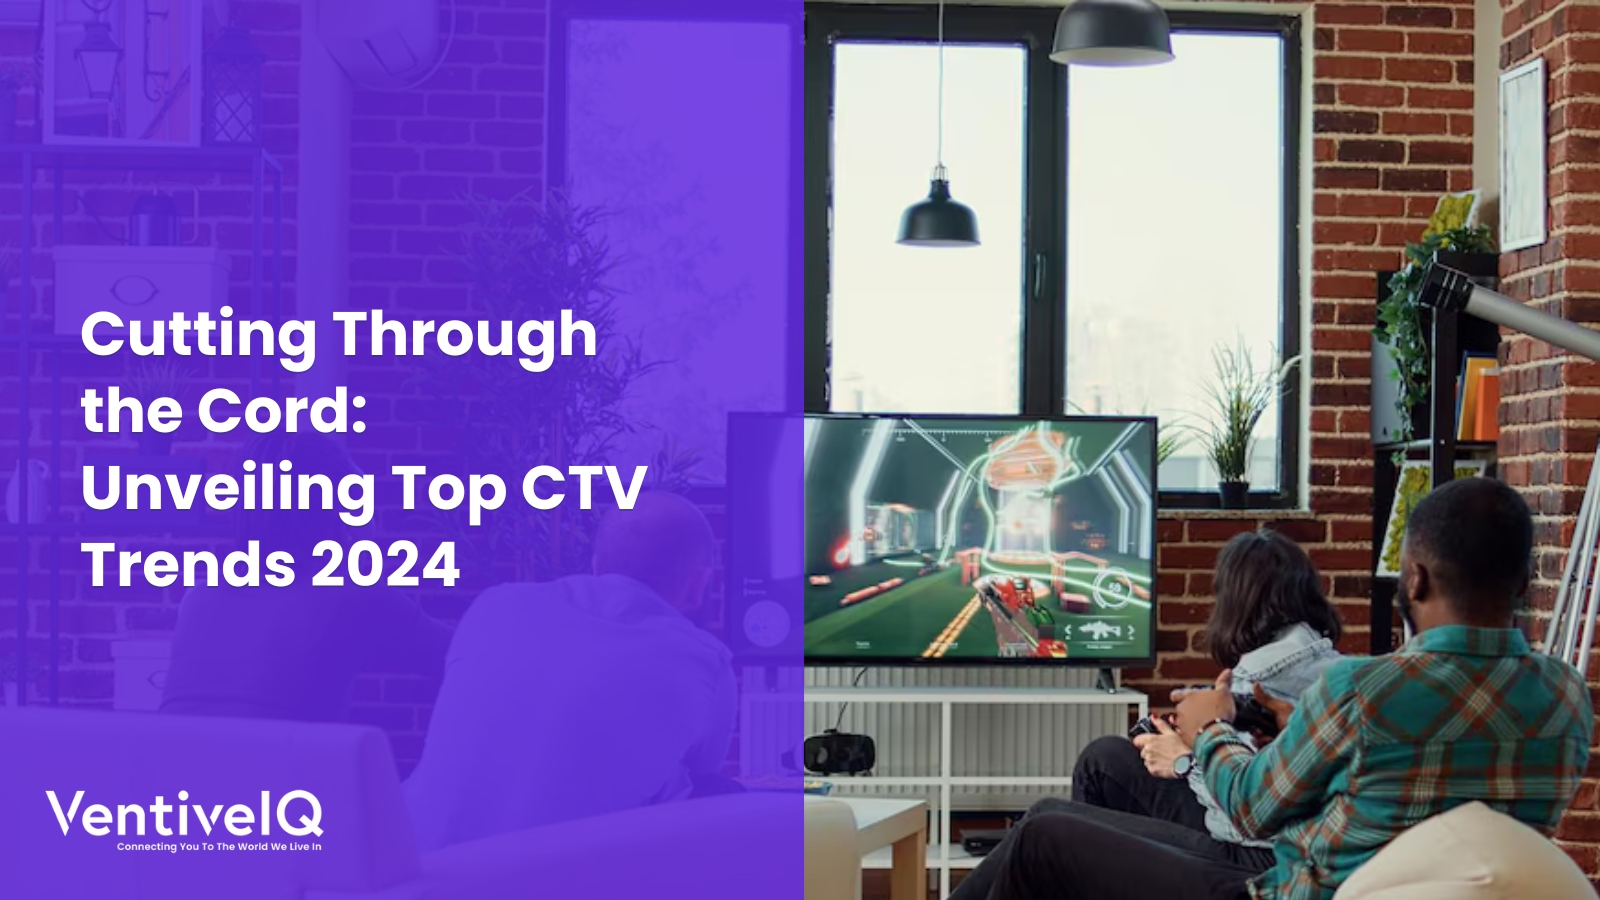 Unveiling Top CTV Trends 2024: Cutting Through the Cord